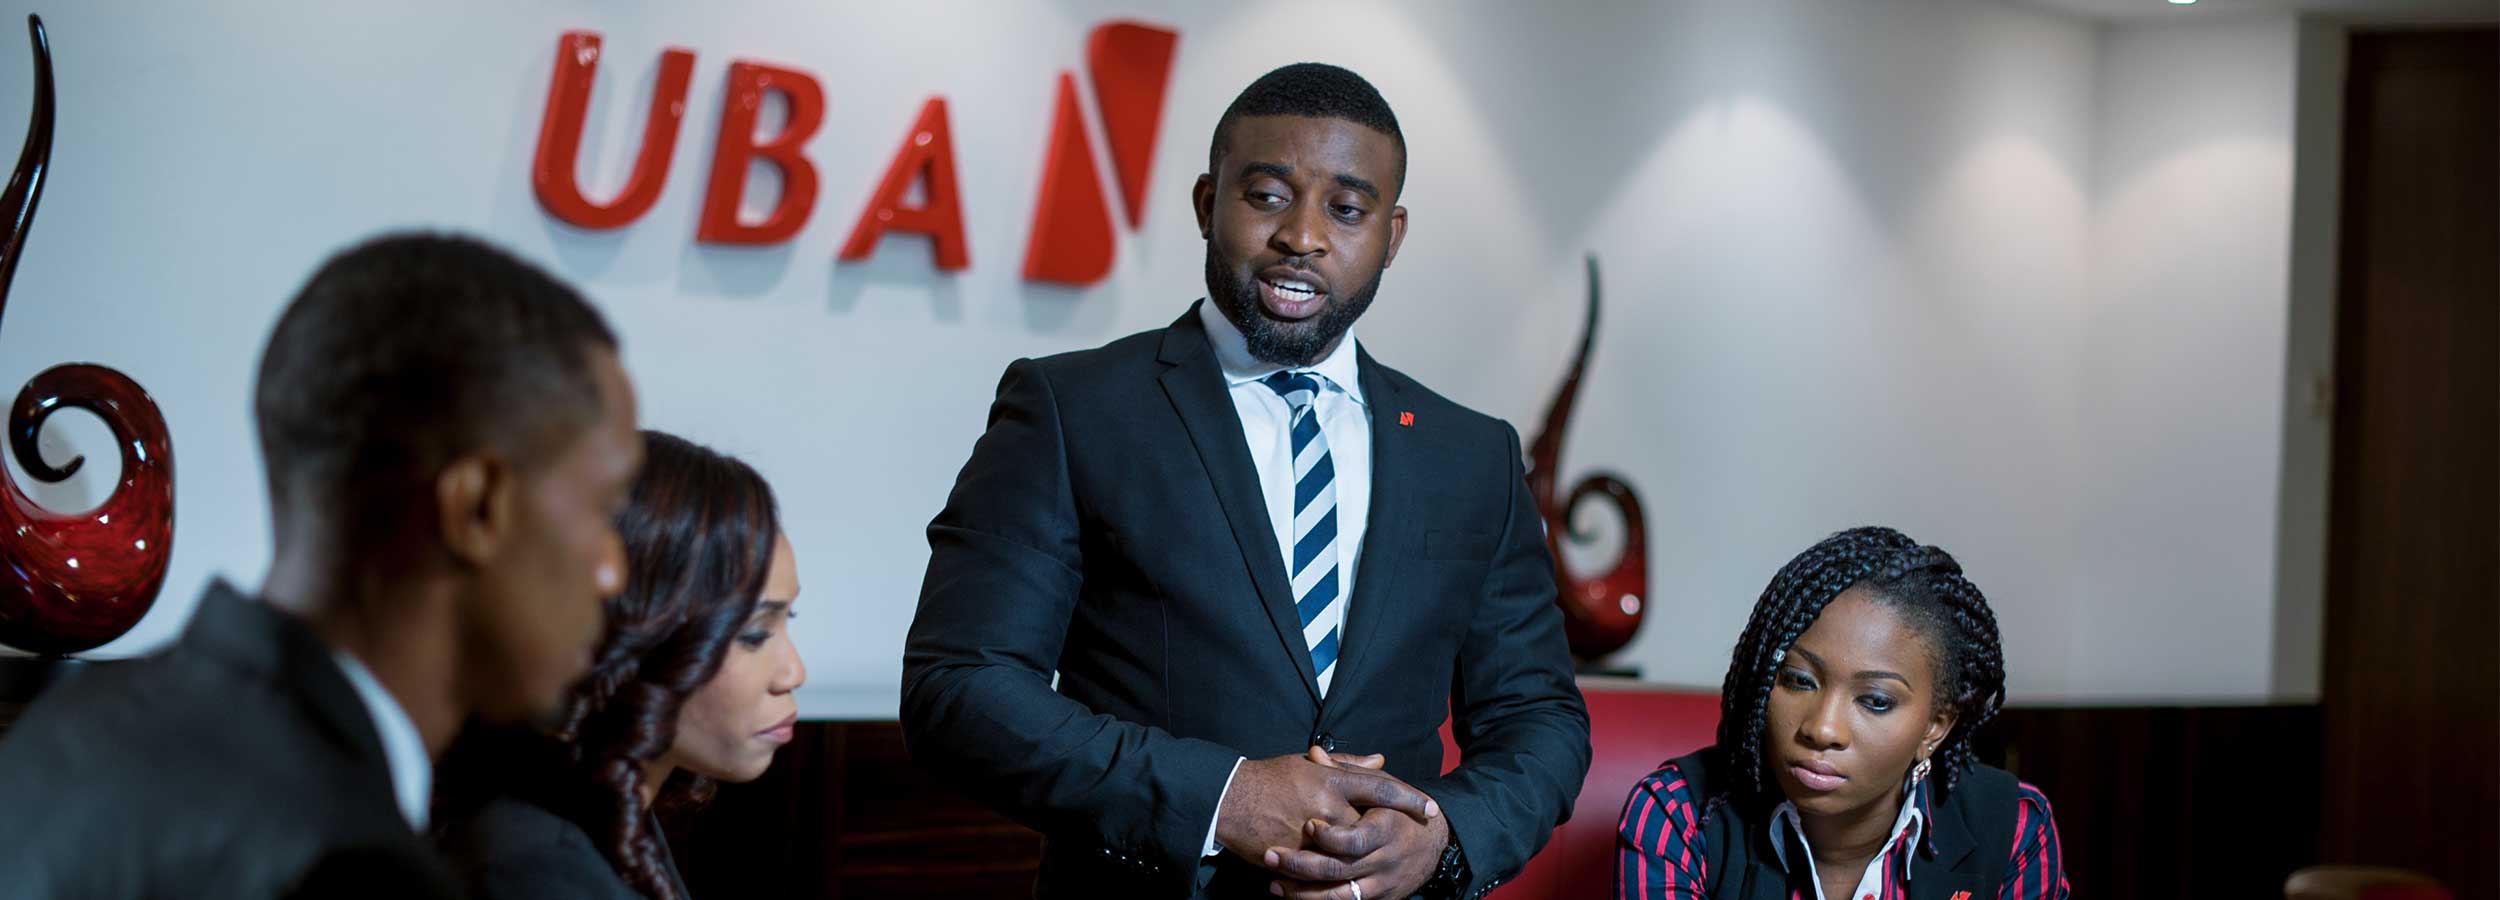 About Us | UBA Nigeria - The Leading Pan-African Bank